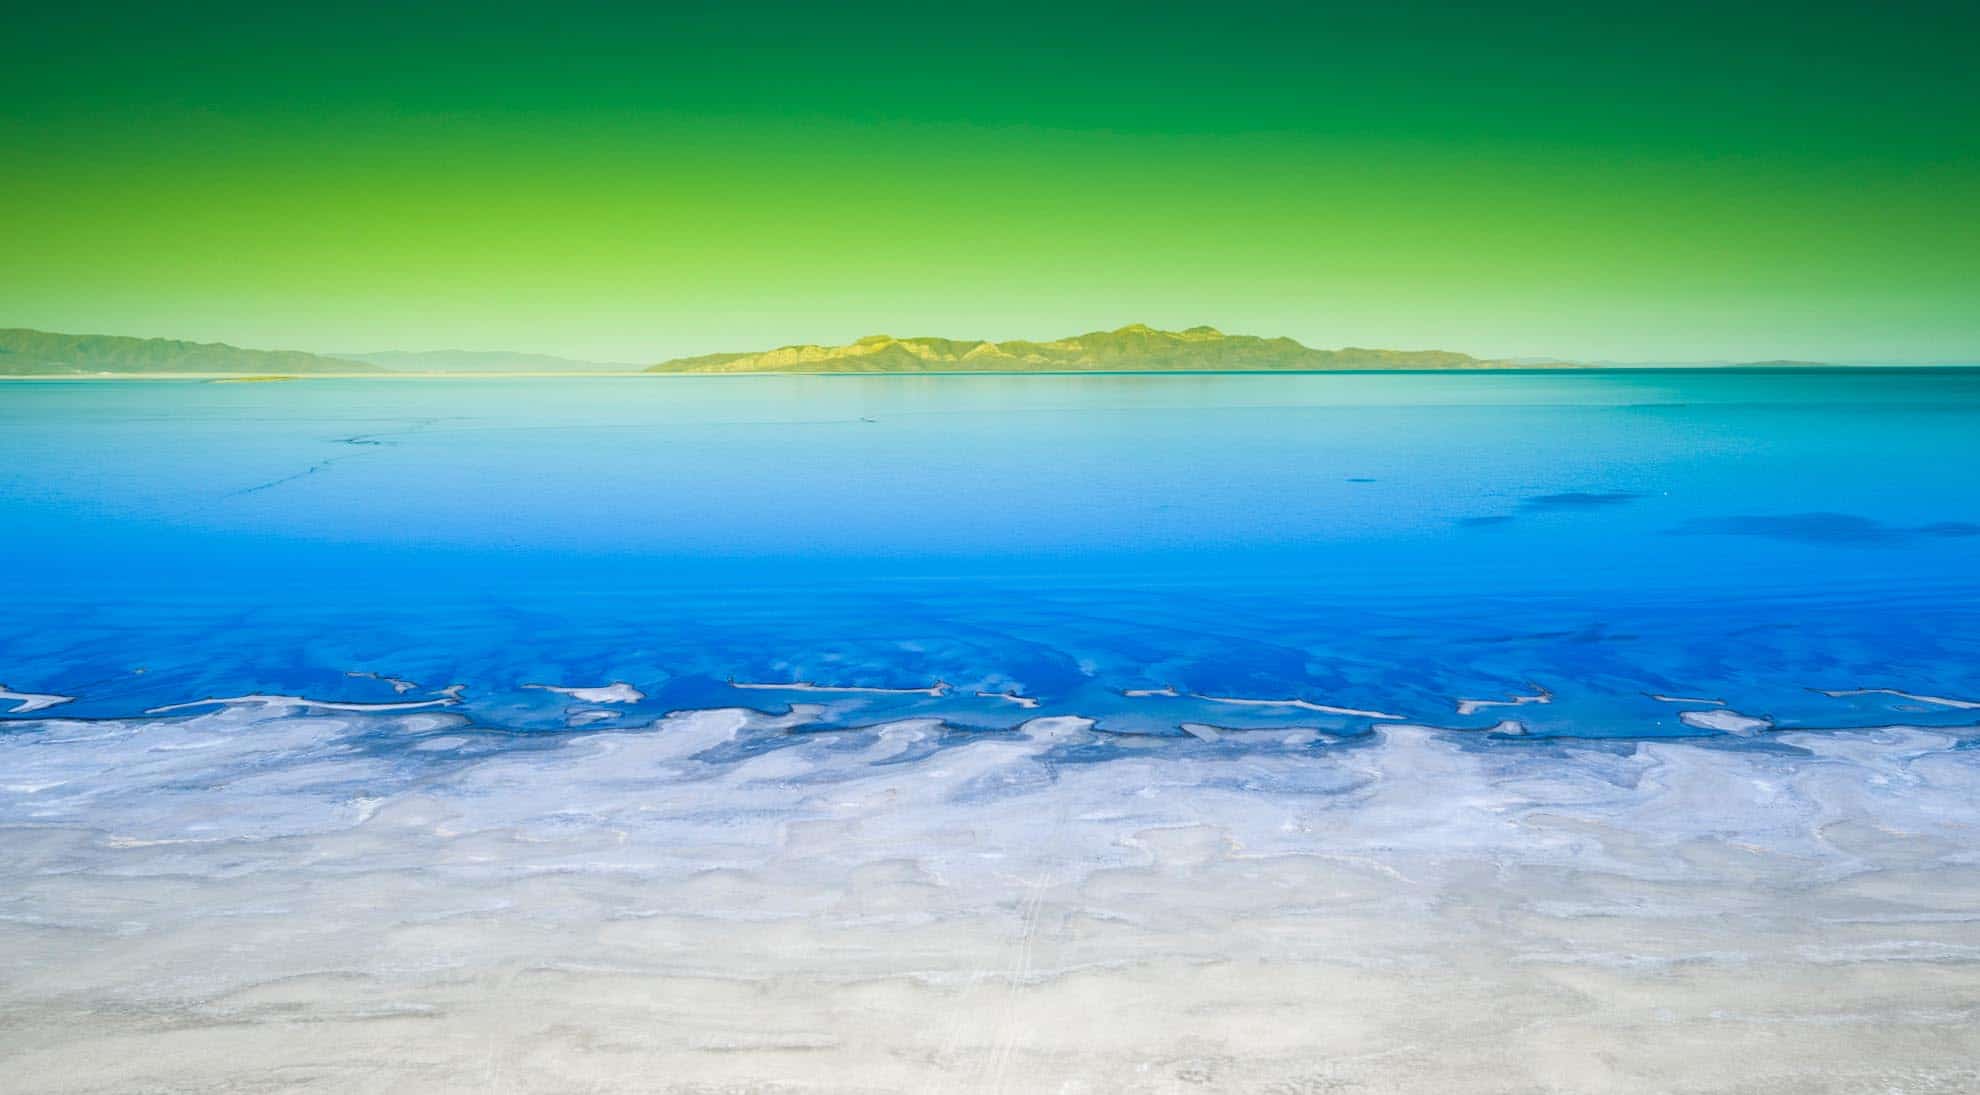 Drone Photograph of The Great Salt Lake with a green sky